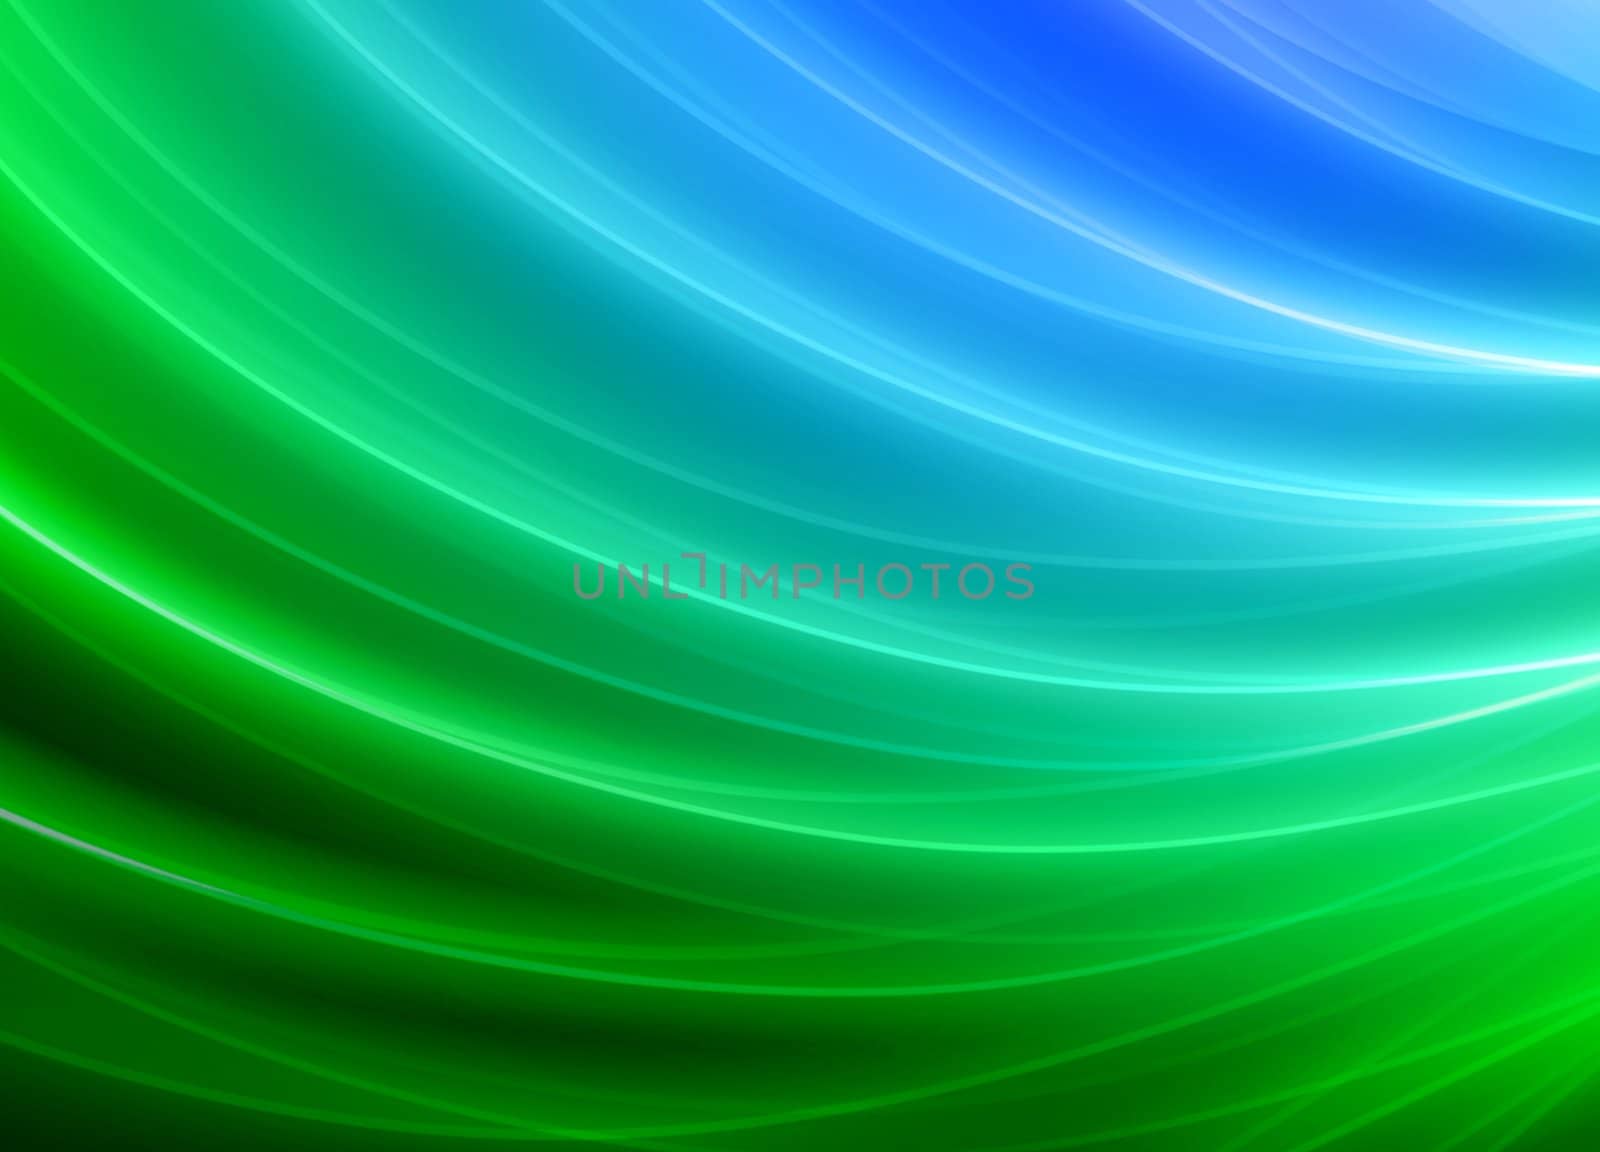 Green and blue blurry waves and curved lines background